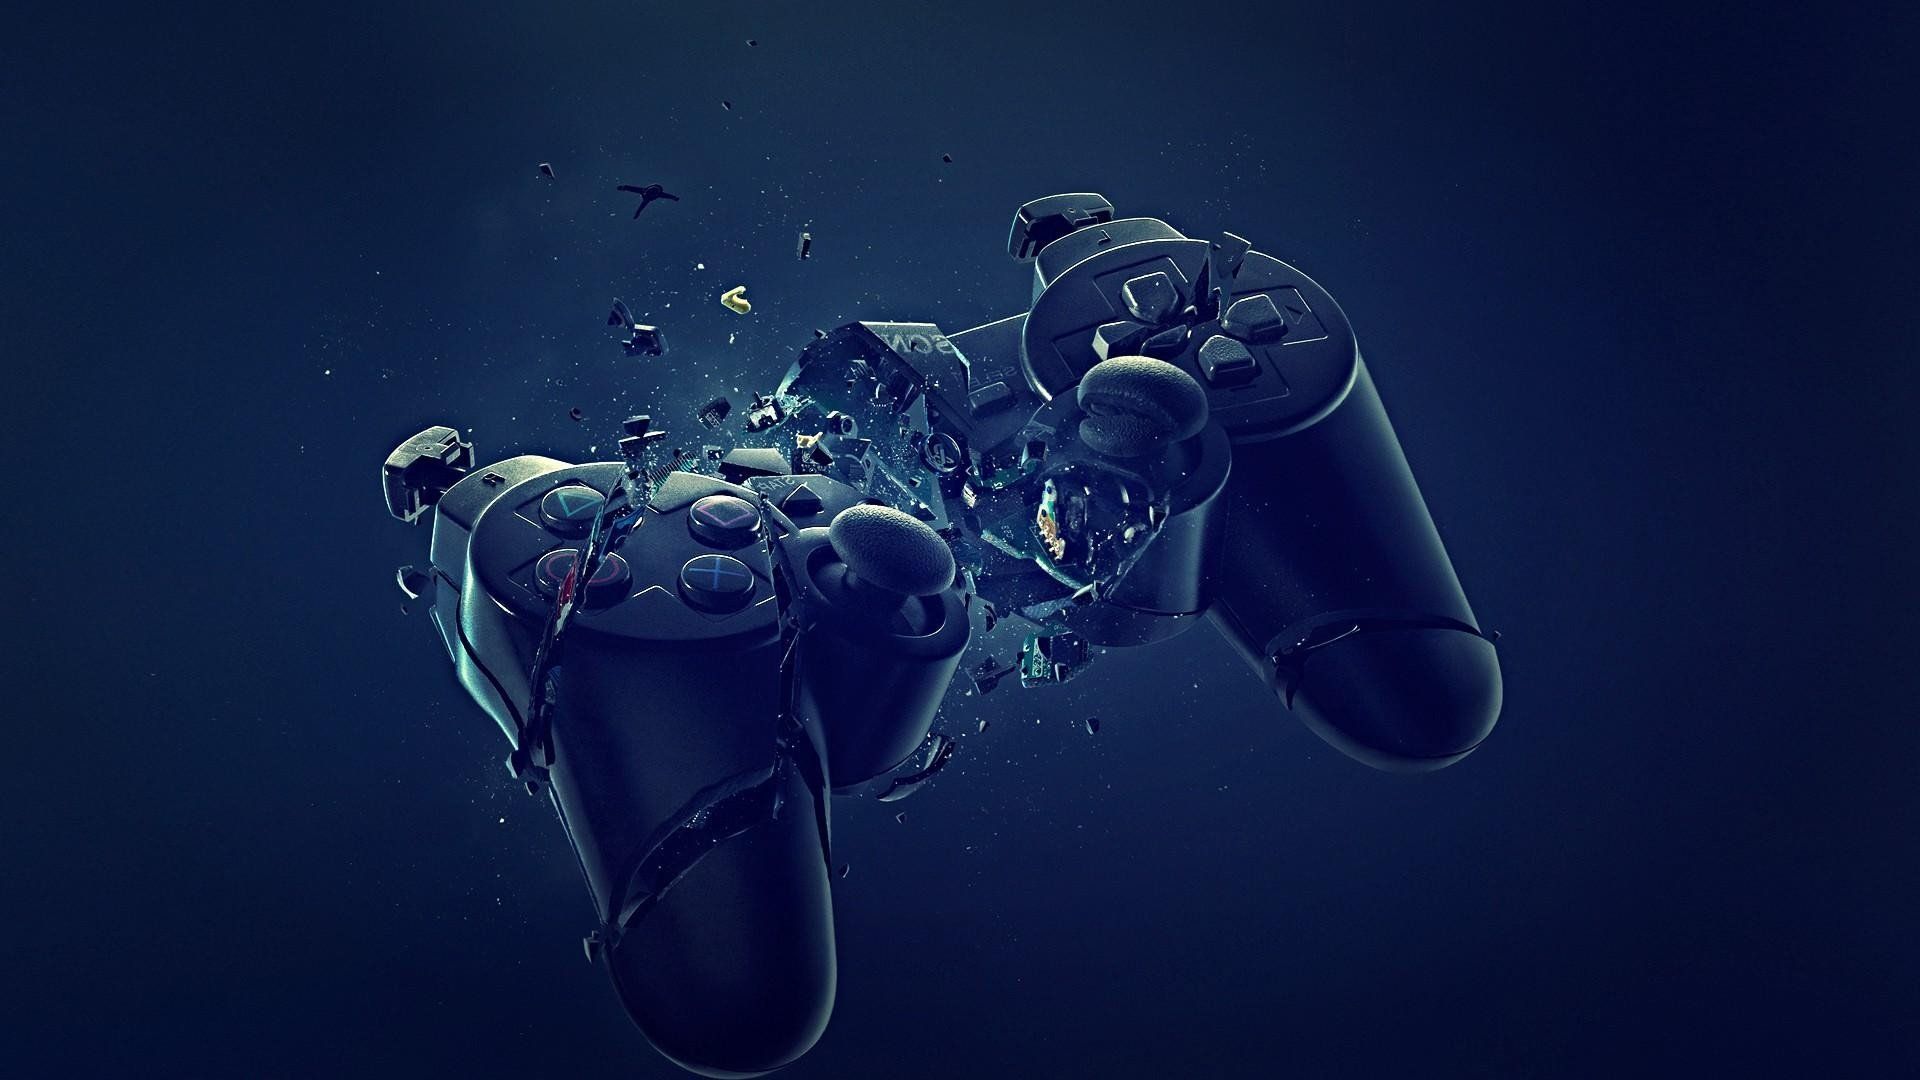 The PS5 COULD Come As Soon As 2018 Or 2019 /ps5 Come Soon 2018 2019/?. Android Wallpaper, Wallpaper Iphone Cute, Live Wallpaper